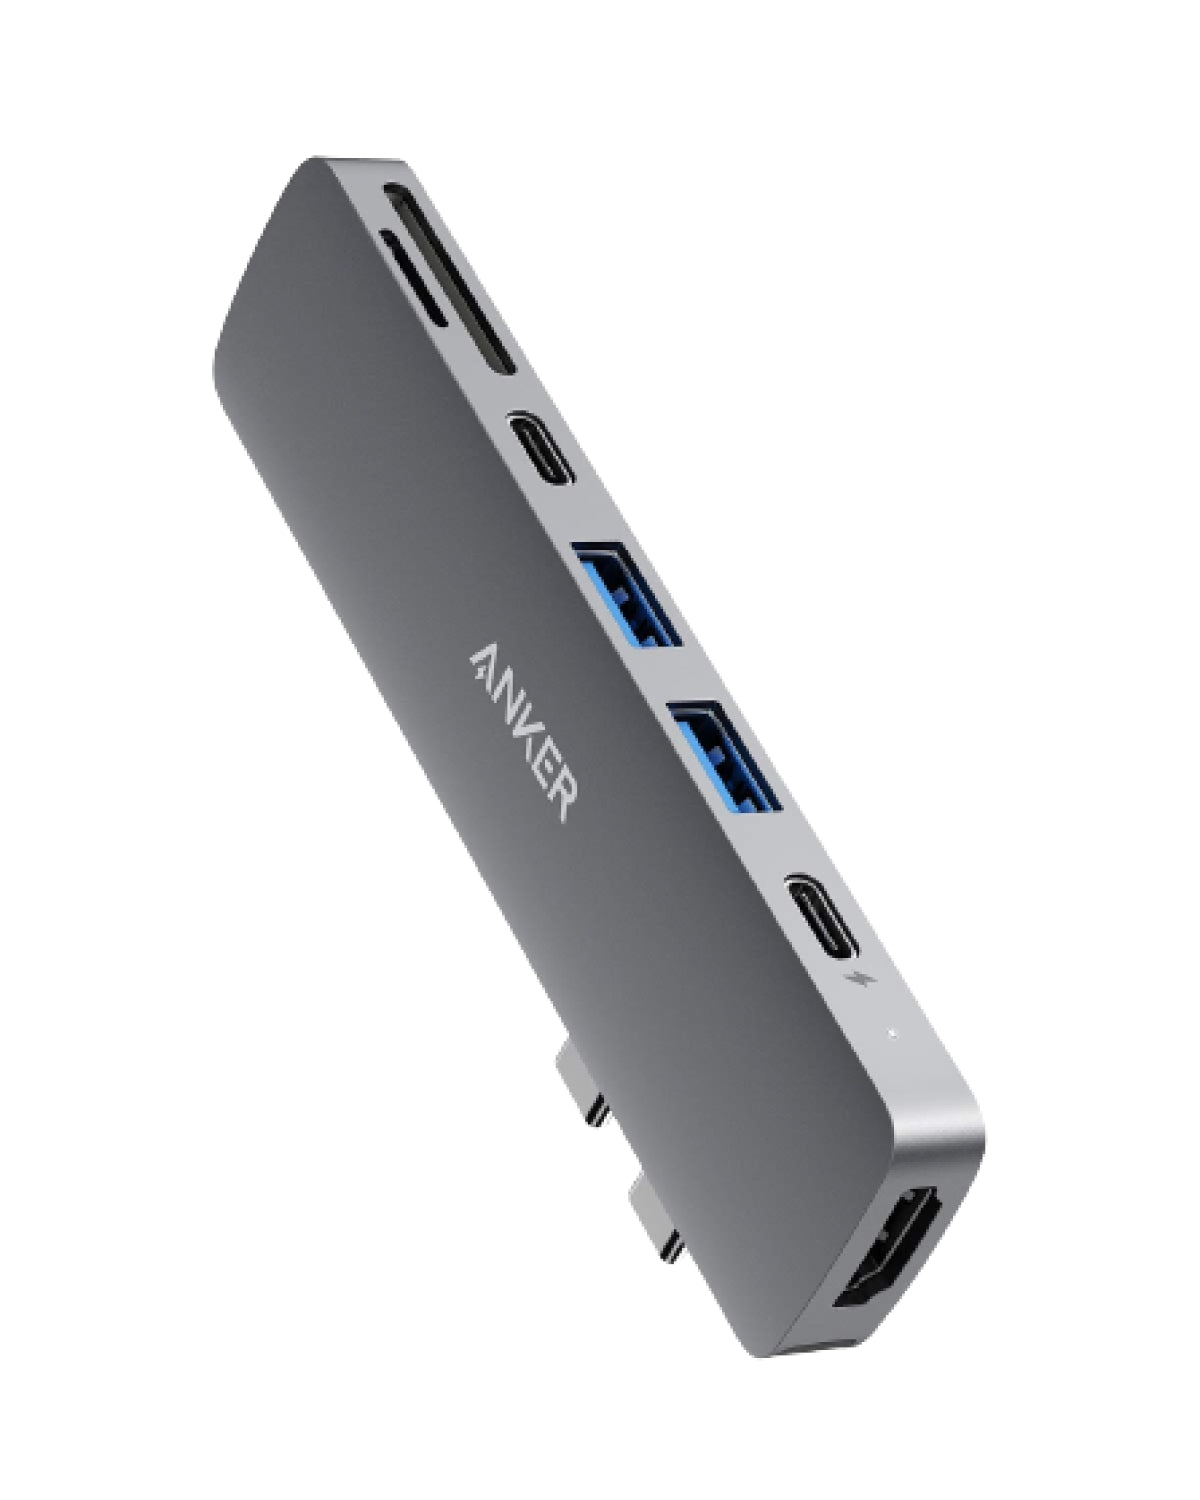 NOW AVAILABLE: 6 New USB-C Hubs / Docking Stations : r/anker